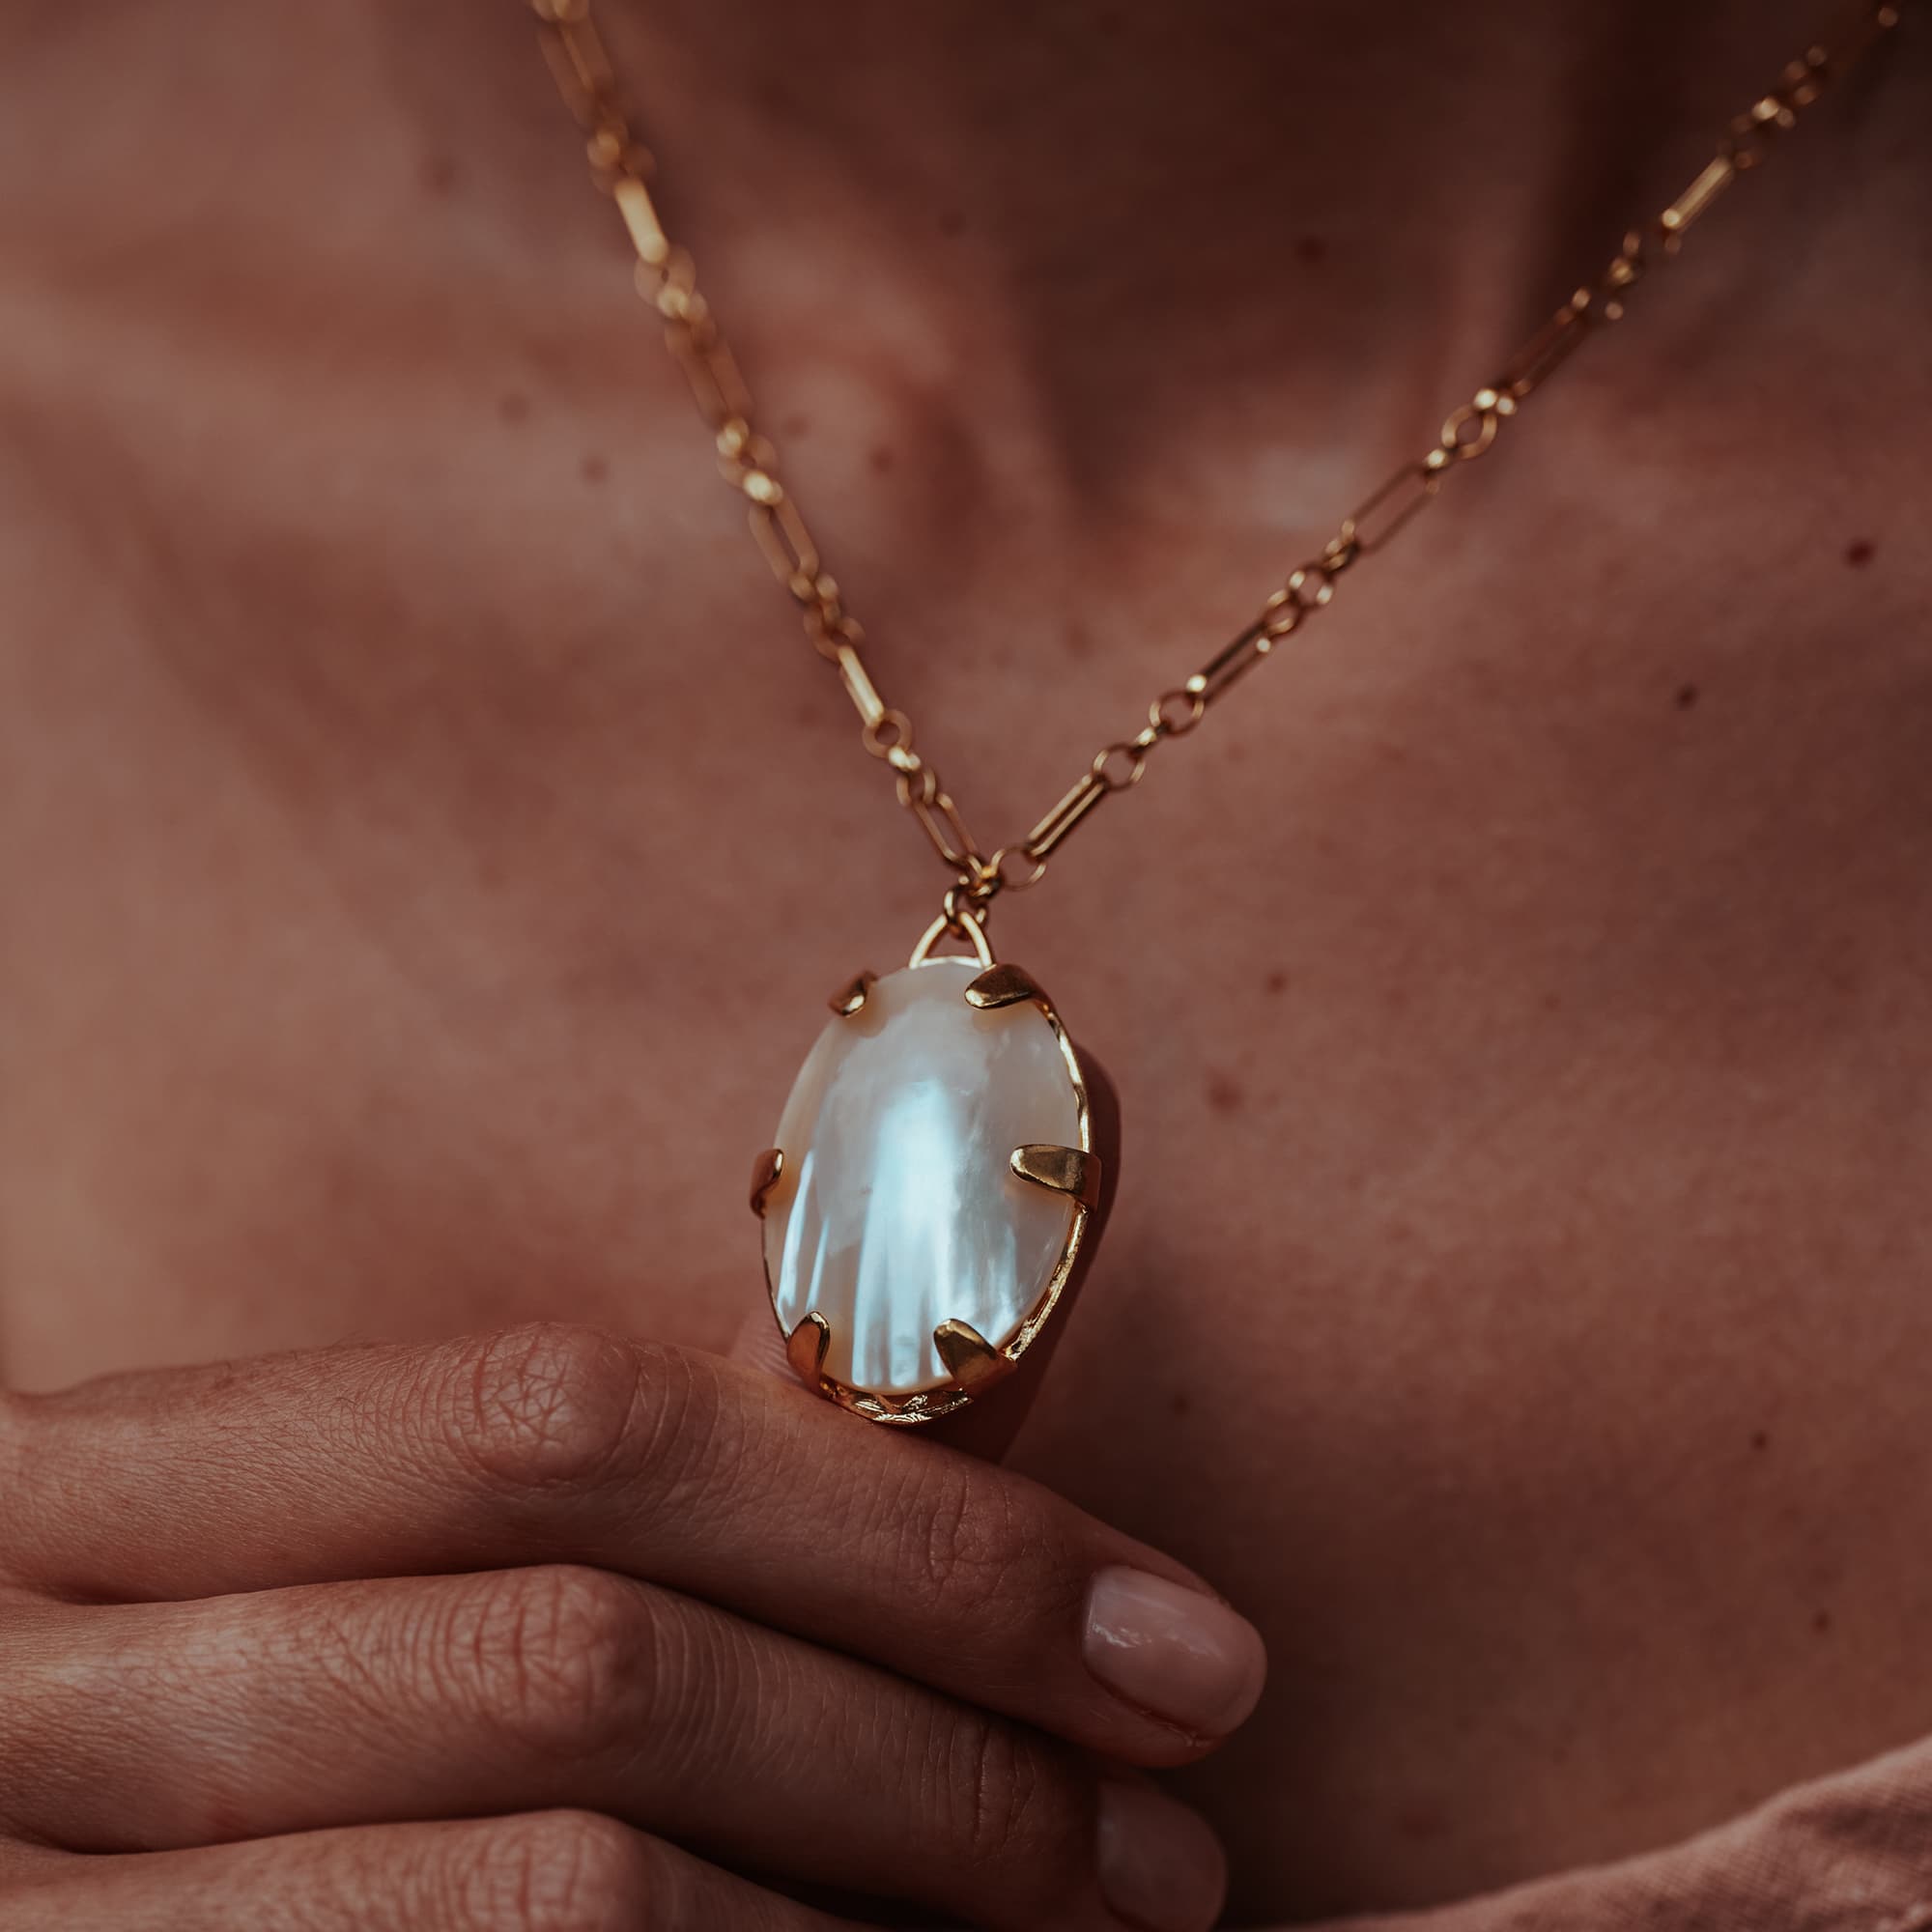 LARGE-TALISMAN-MOTHER-OF-PEARL-NECKLACE-VINTAGE-CHAIN-DSC07820-HIGH-RES-ORIGINALS-CABINET-JEWELLERY-CHLOE-UPTON-STUDIO-PHOTOGRAPHY